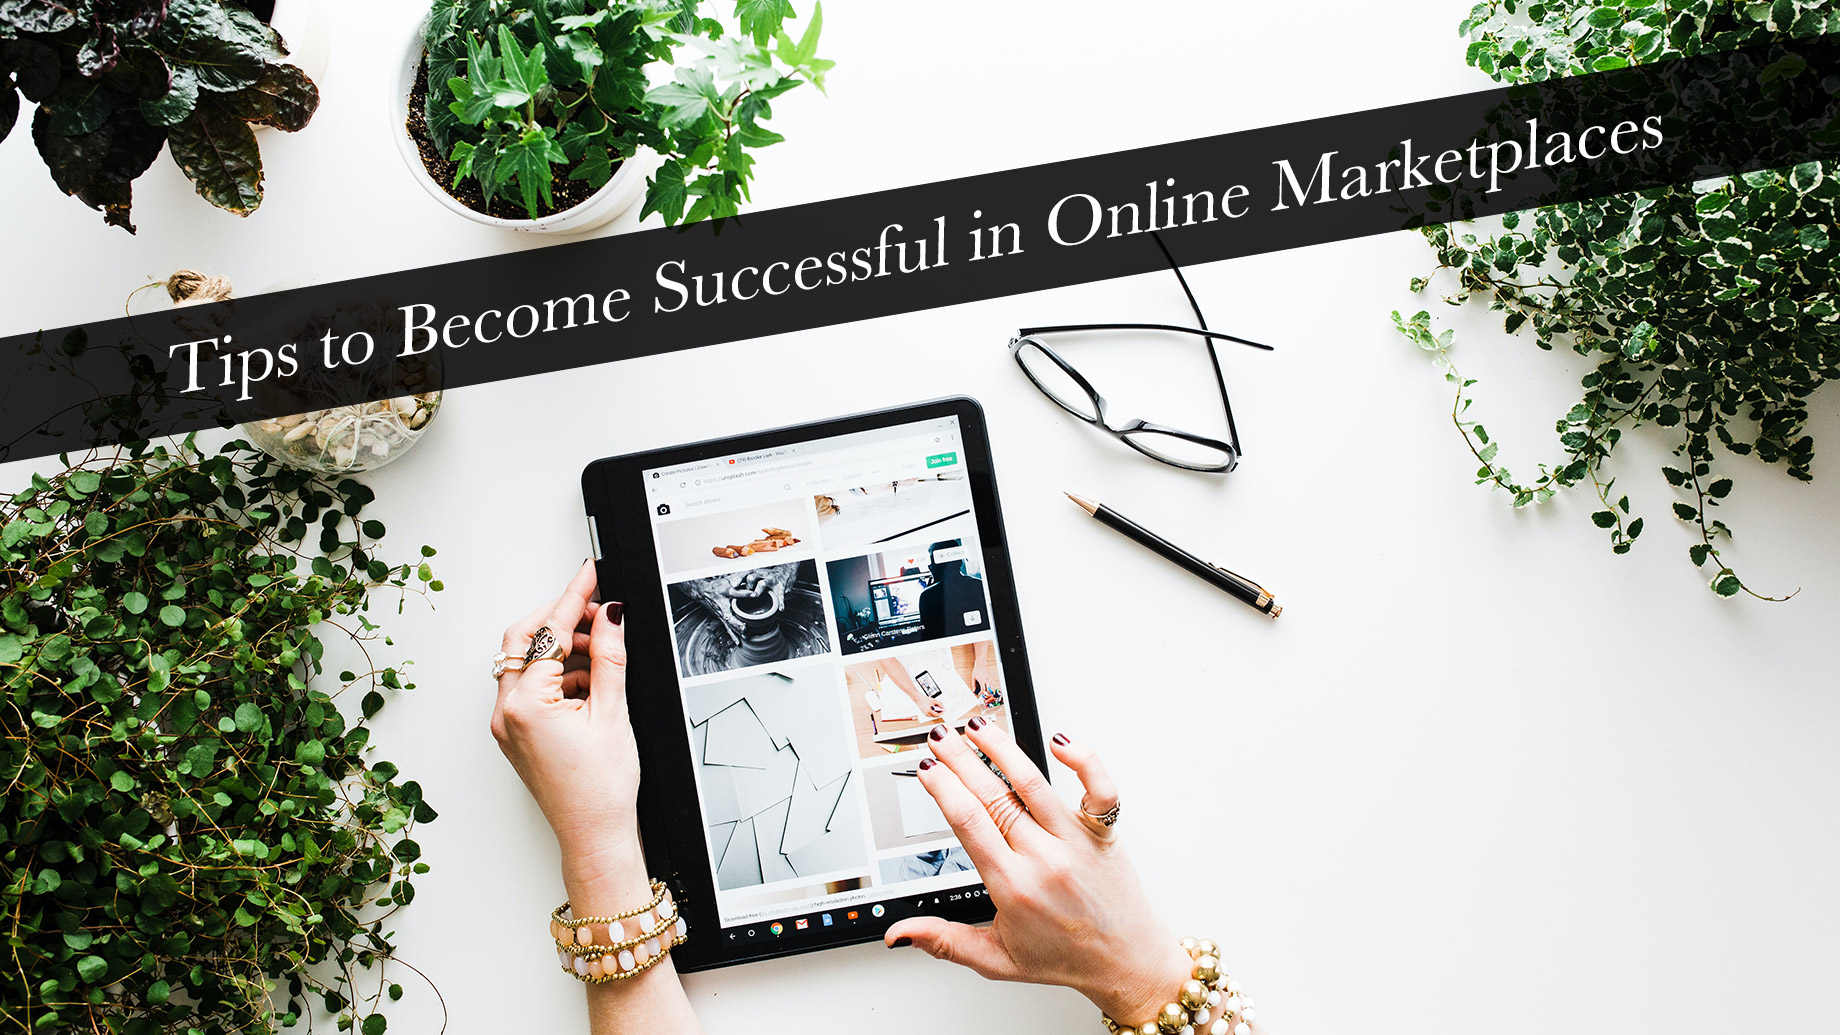 Tips to Become Successful in Online Marketplaces